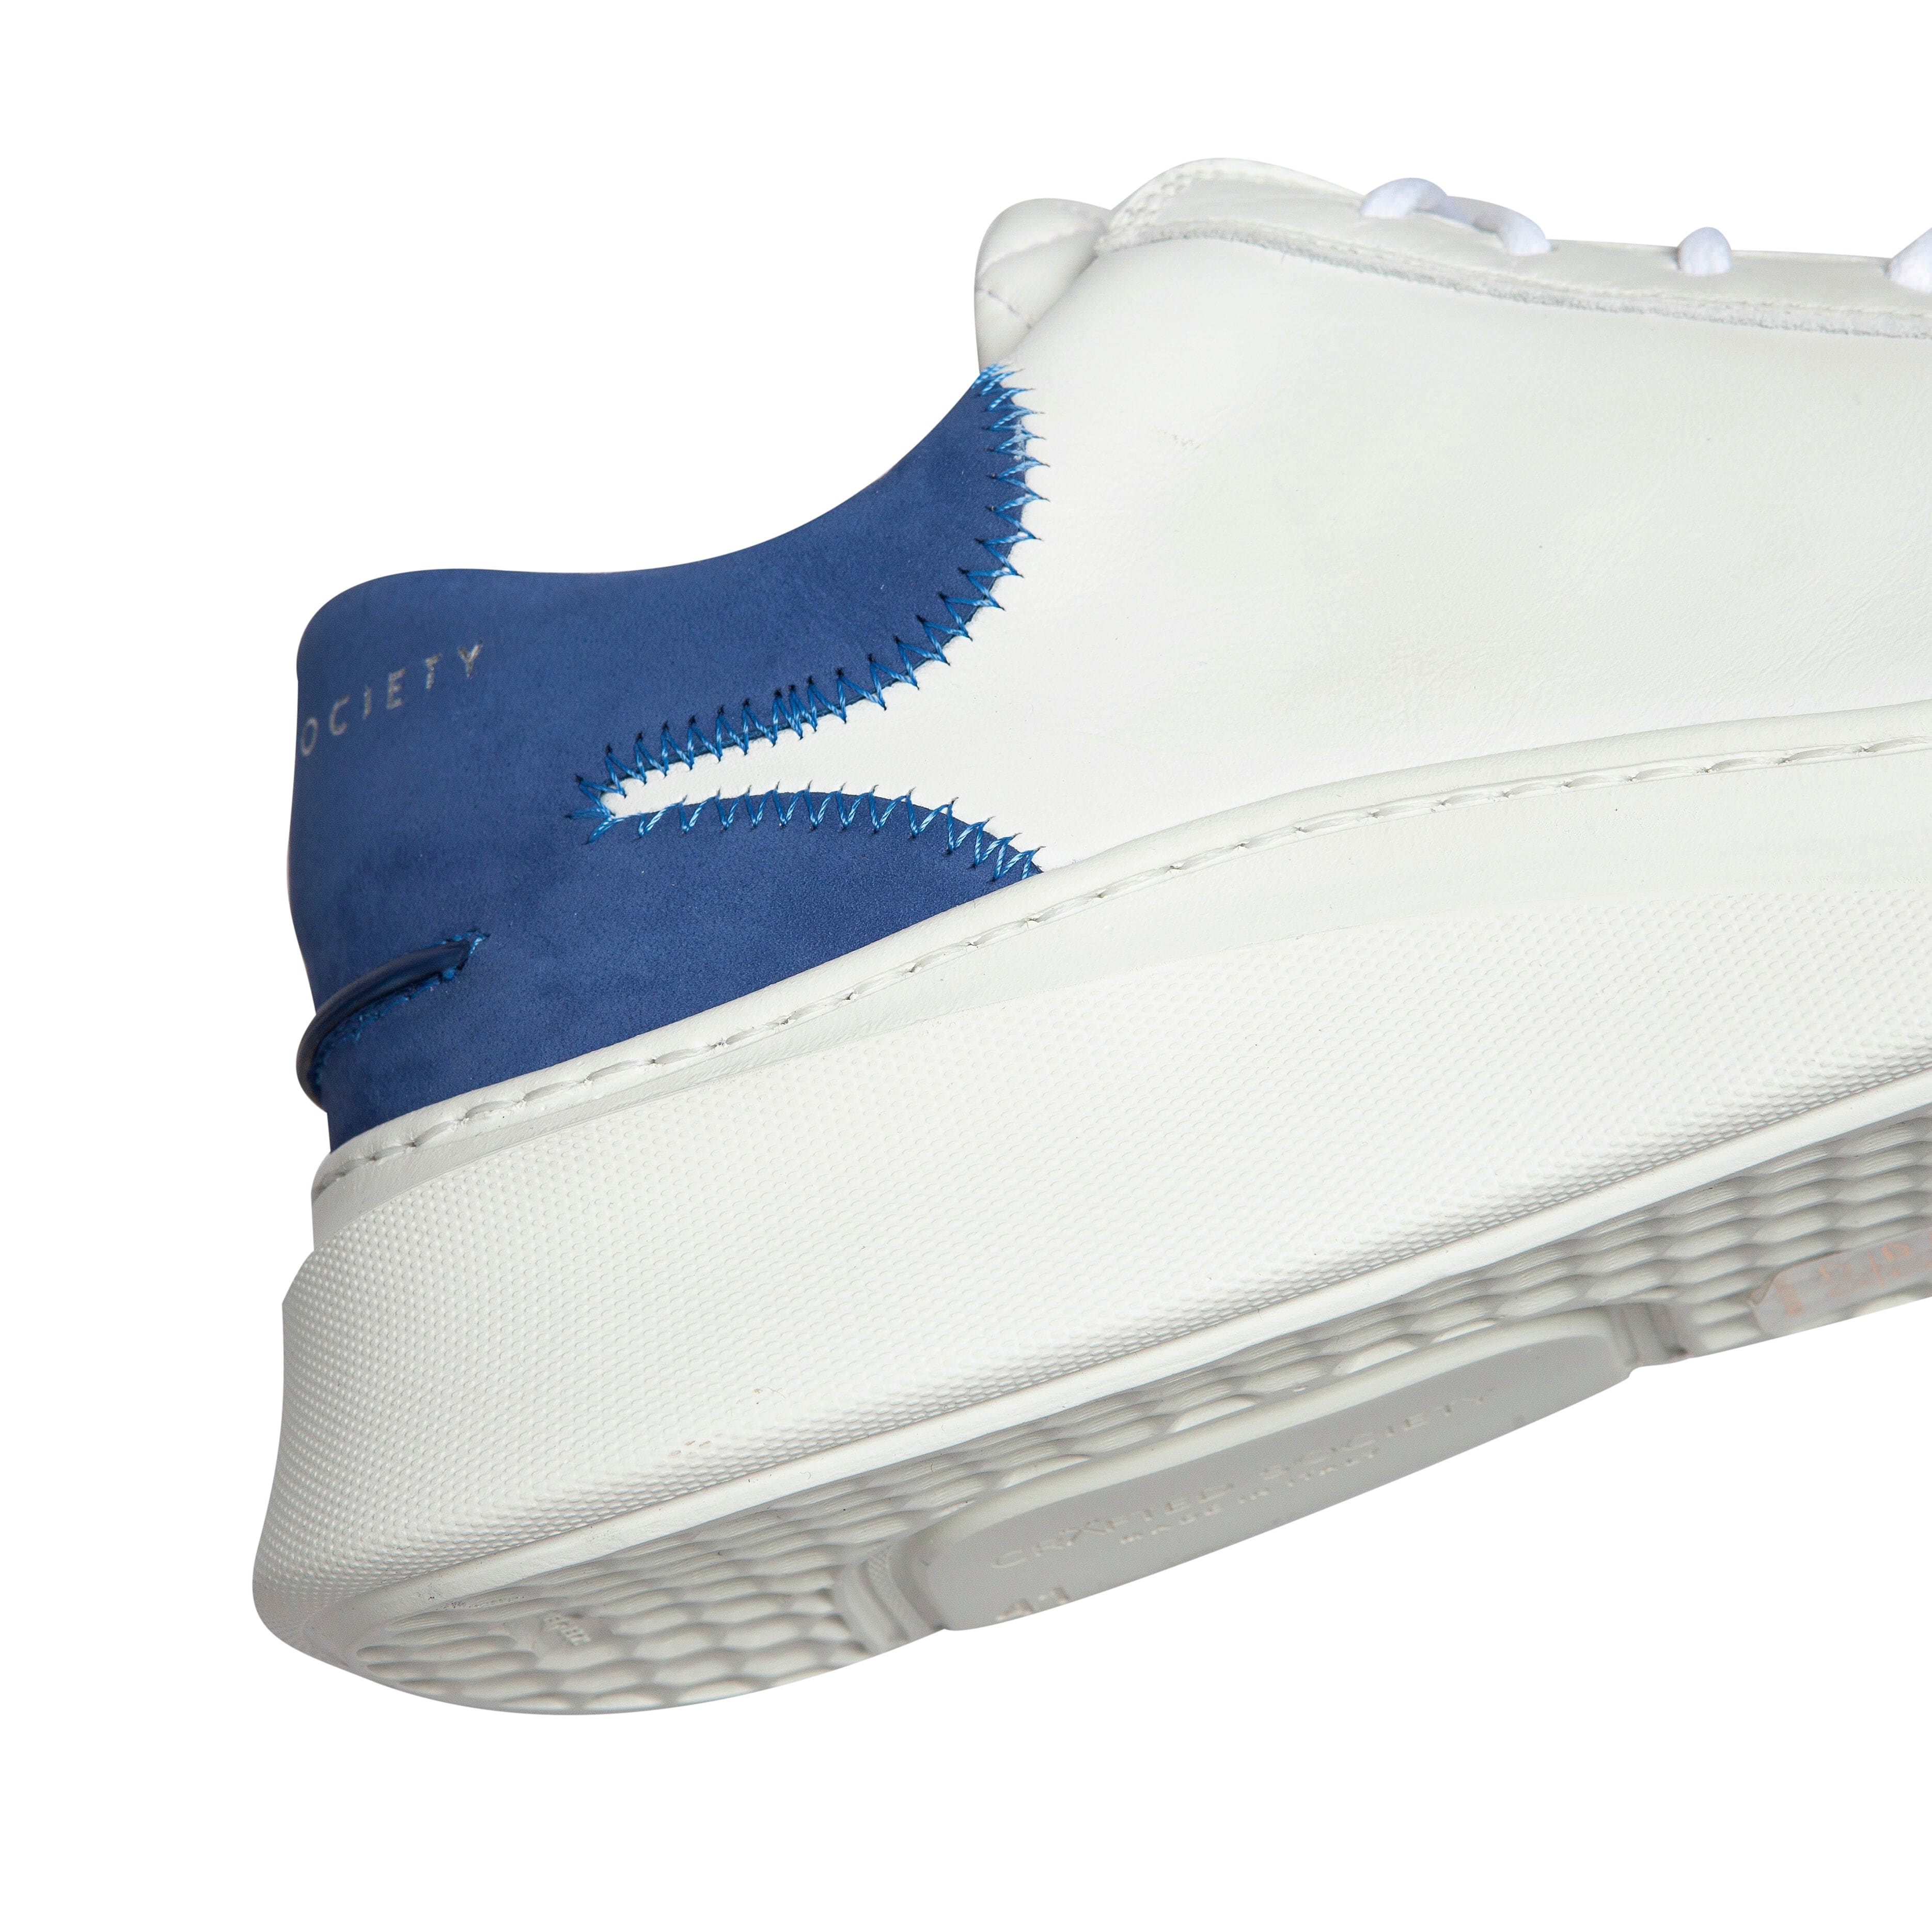 Matteo Low Top Sneaker | White & Royal Blue Full Grain Leather | Made in Italy